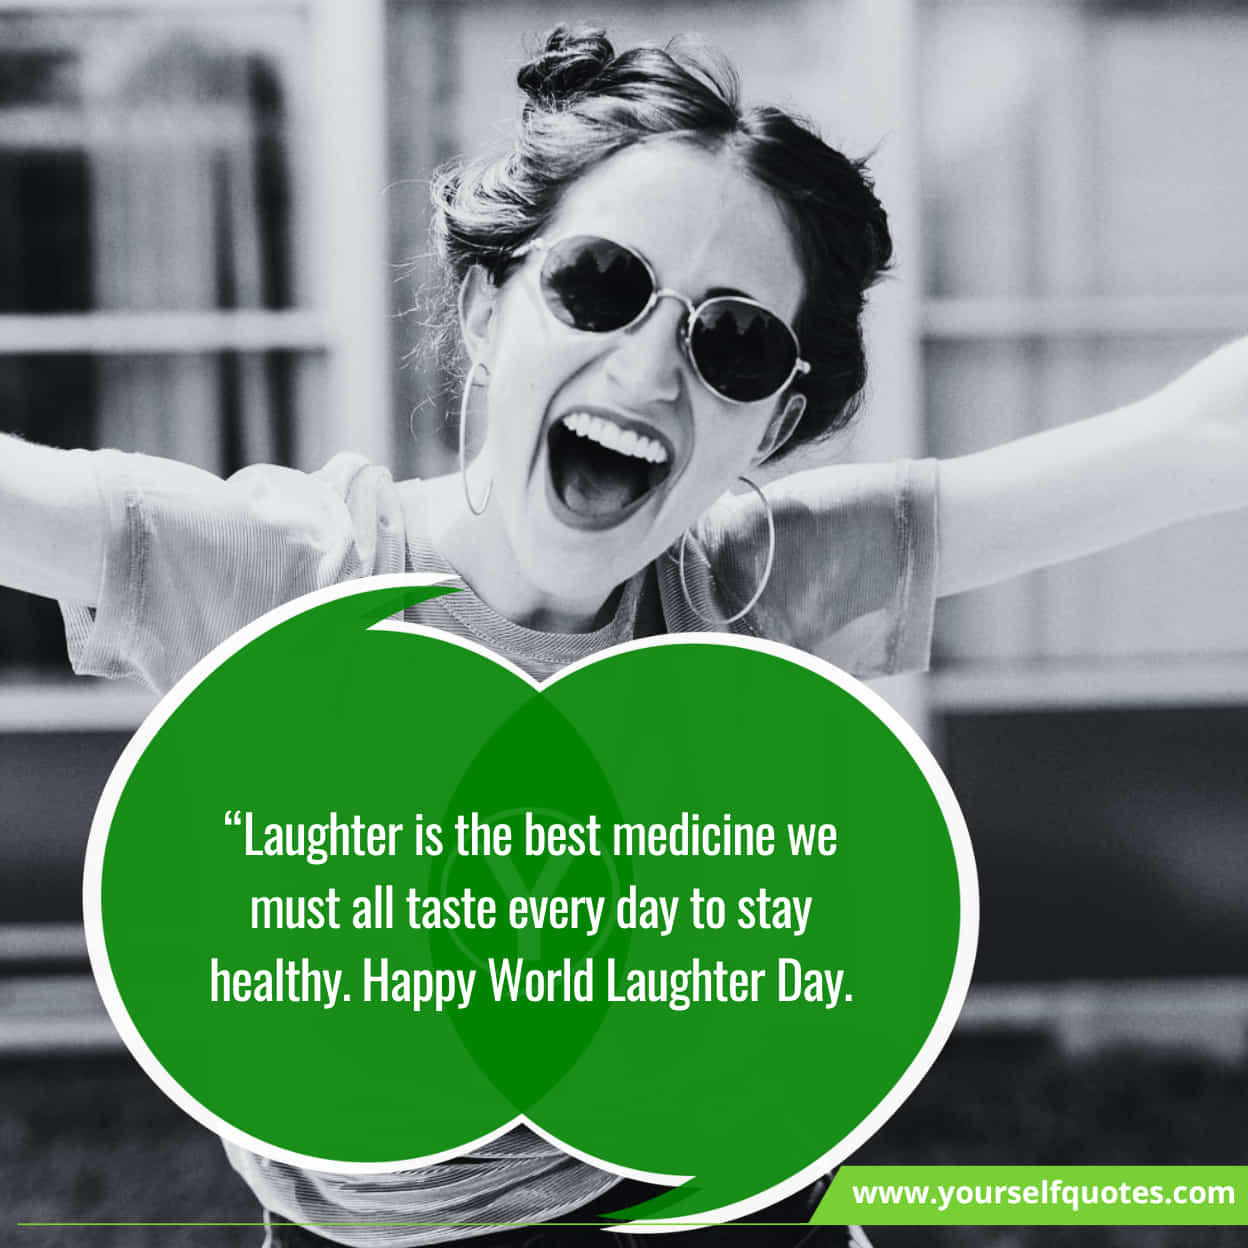 Motivational World Laughter Day Wishes